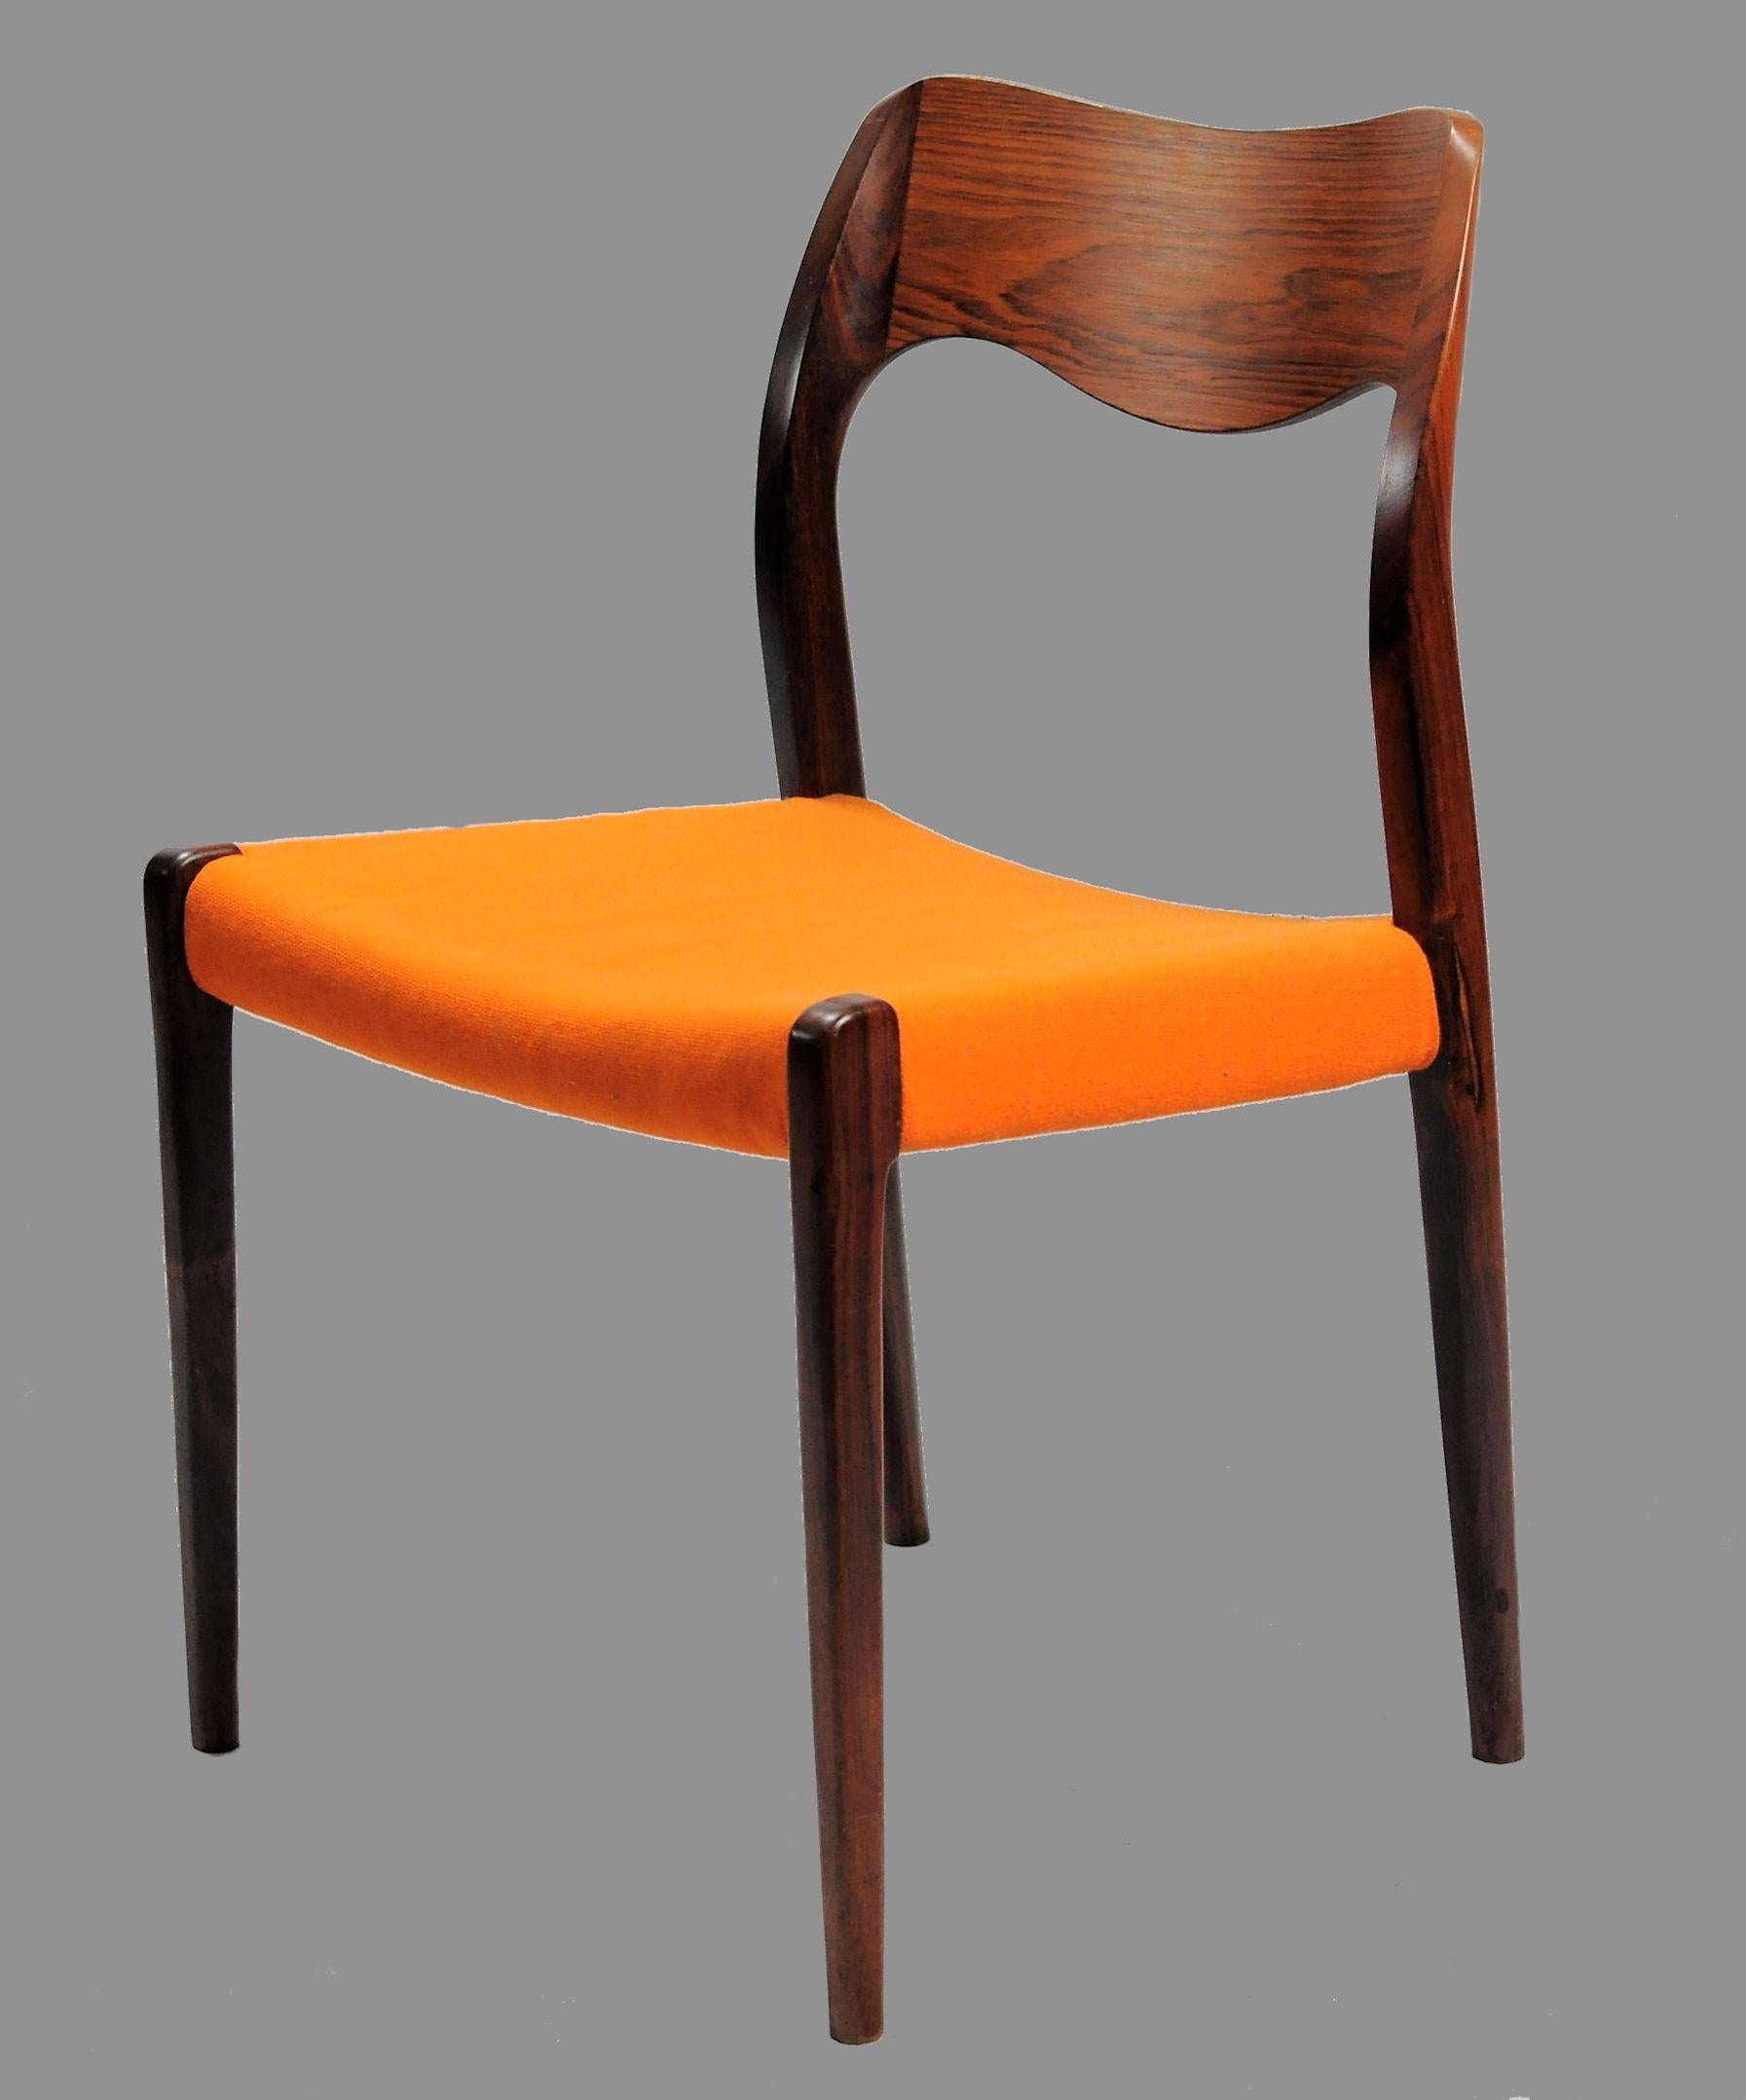 Set of 8 model 71 rosewood dining chairs designed by Niels Otto Møller in 1951.

The chairs feature a solid frame and backrest in rosewood designed with straight lined legs and an elegant organic shaped backrest with the soft lines and curves that